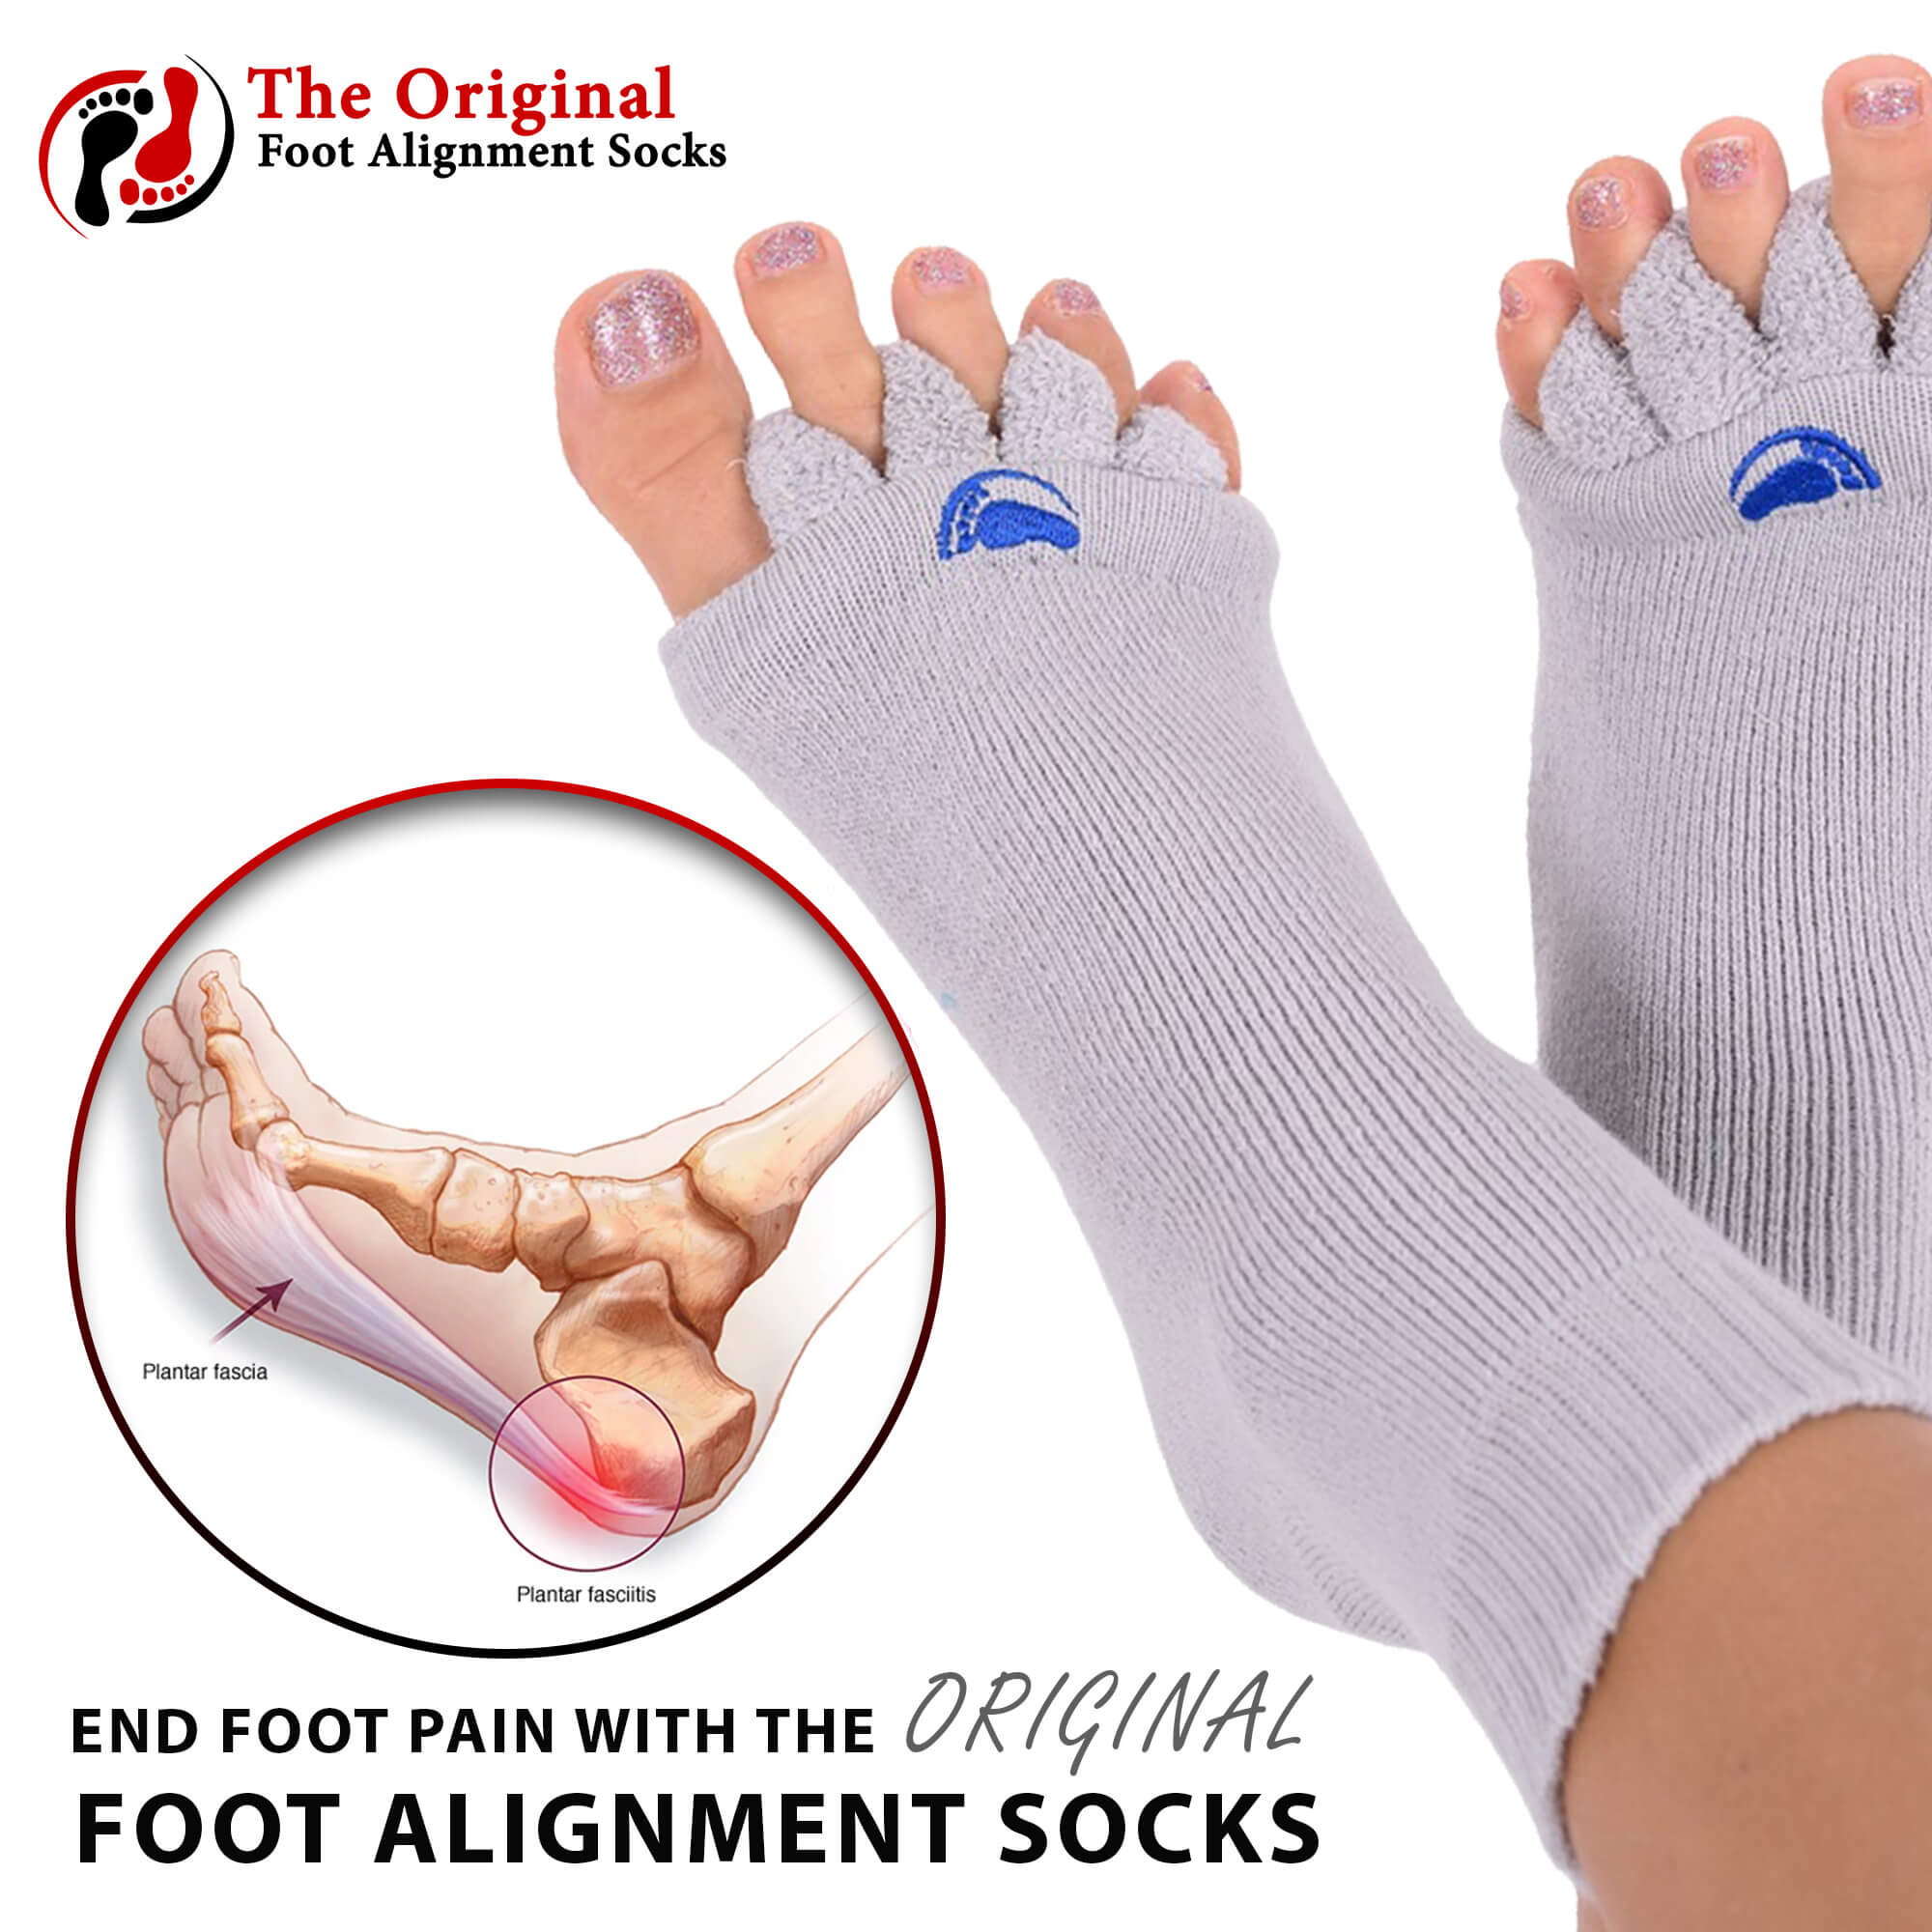 Bunion pain relief and prevention with Light Grey Foot Alignment Socks –  My-Happy Feet - The Original Foot Alignment Socks